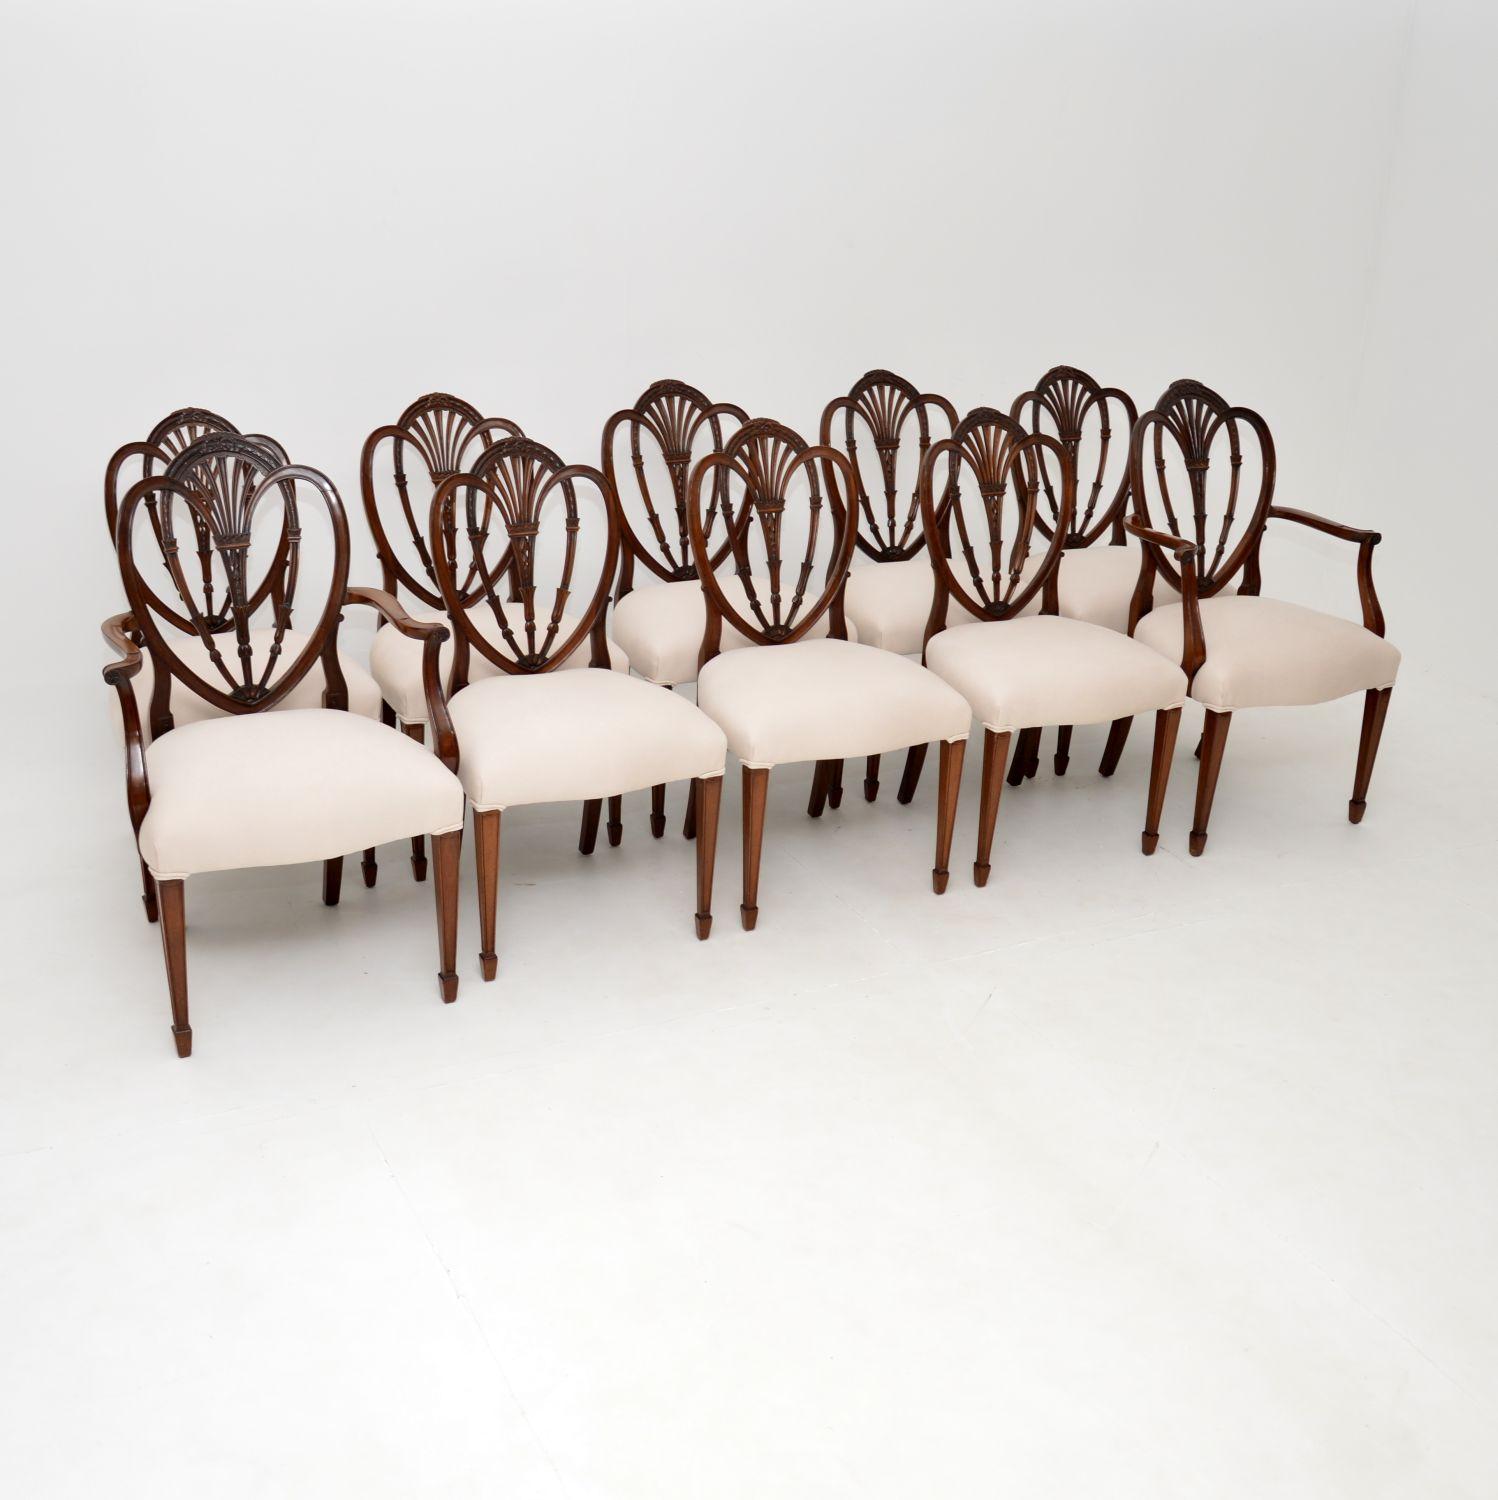 An outstanding set of ten antique solid wood dining chairs with a classic Hepplewhite shield back design. These were made in England, they date from around the 1880-1900 period.

They are of exceptional quality, with beautiful detailed carving on